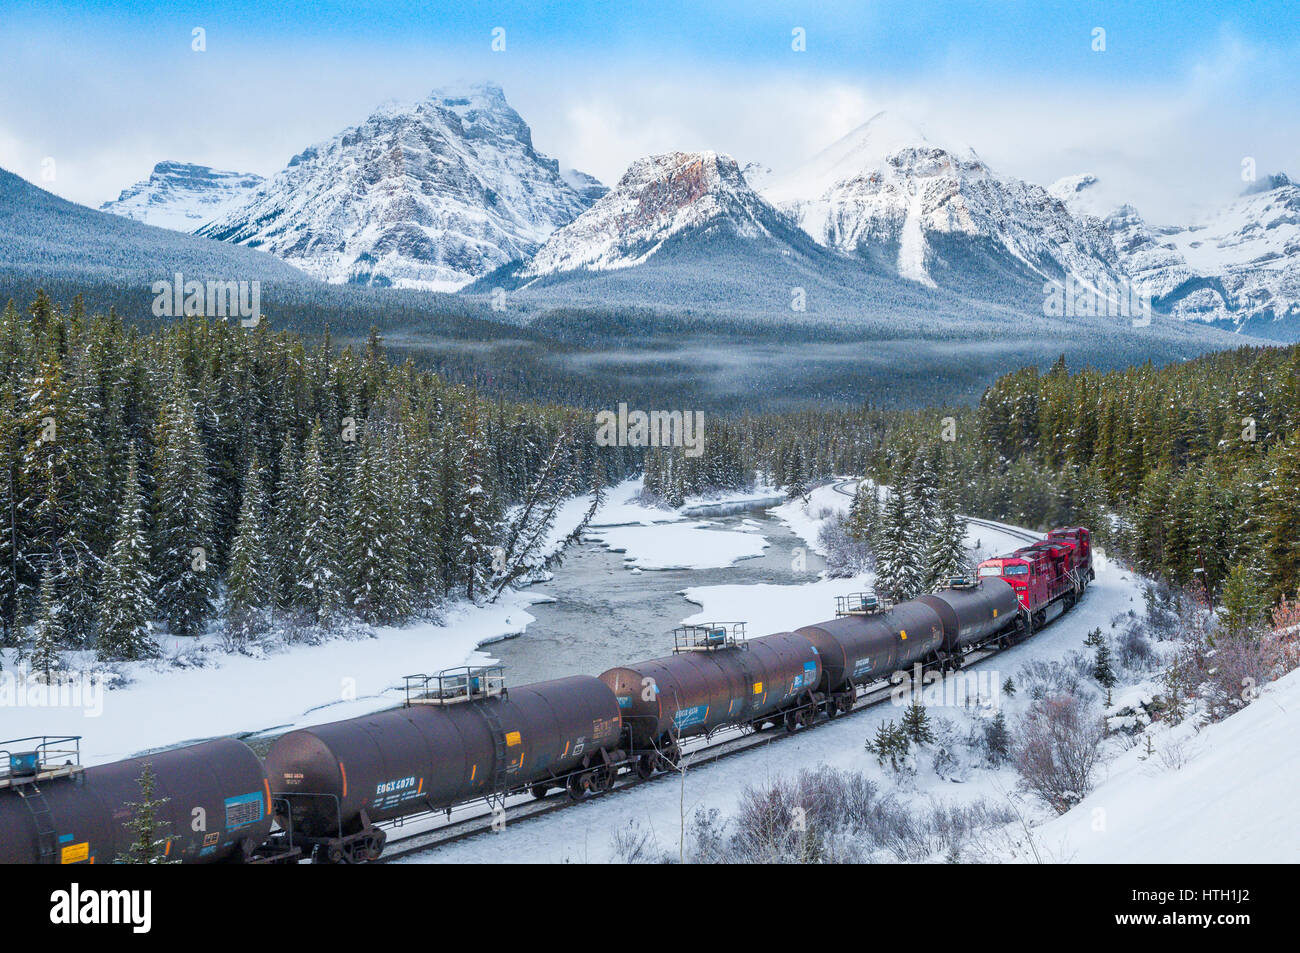 Train at Morant's curve with Haddo Peak, Saddle Mountain, Fairview Mountain in the background, Banff National Park, Alberta, Canada Stock Photo